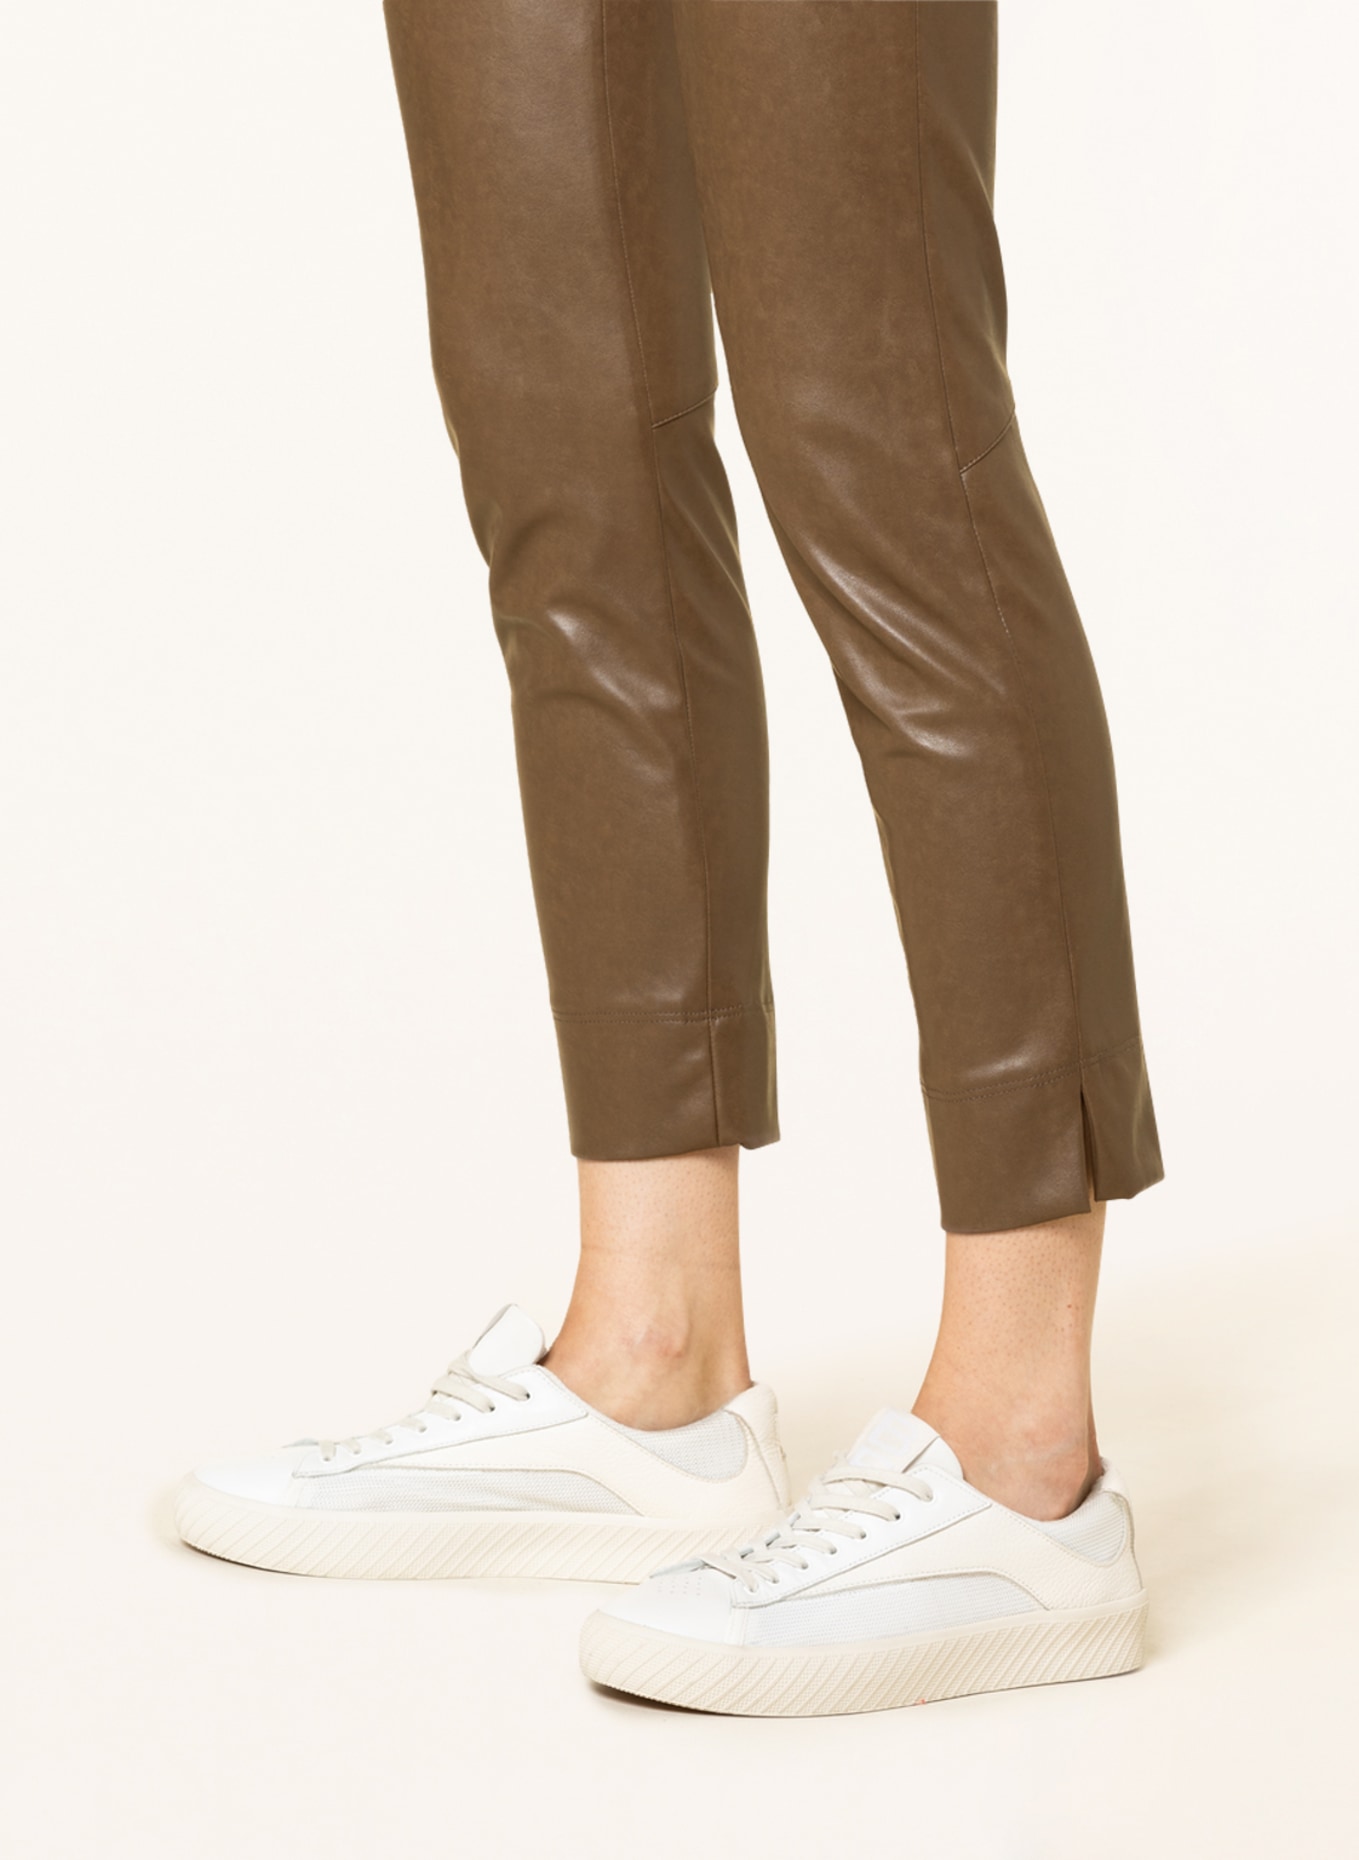 SEDUCTIVE 7/8 pants SABRINA in leather look, Color: BROWN (Image 5)